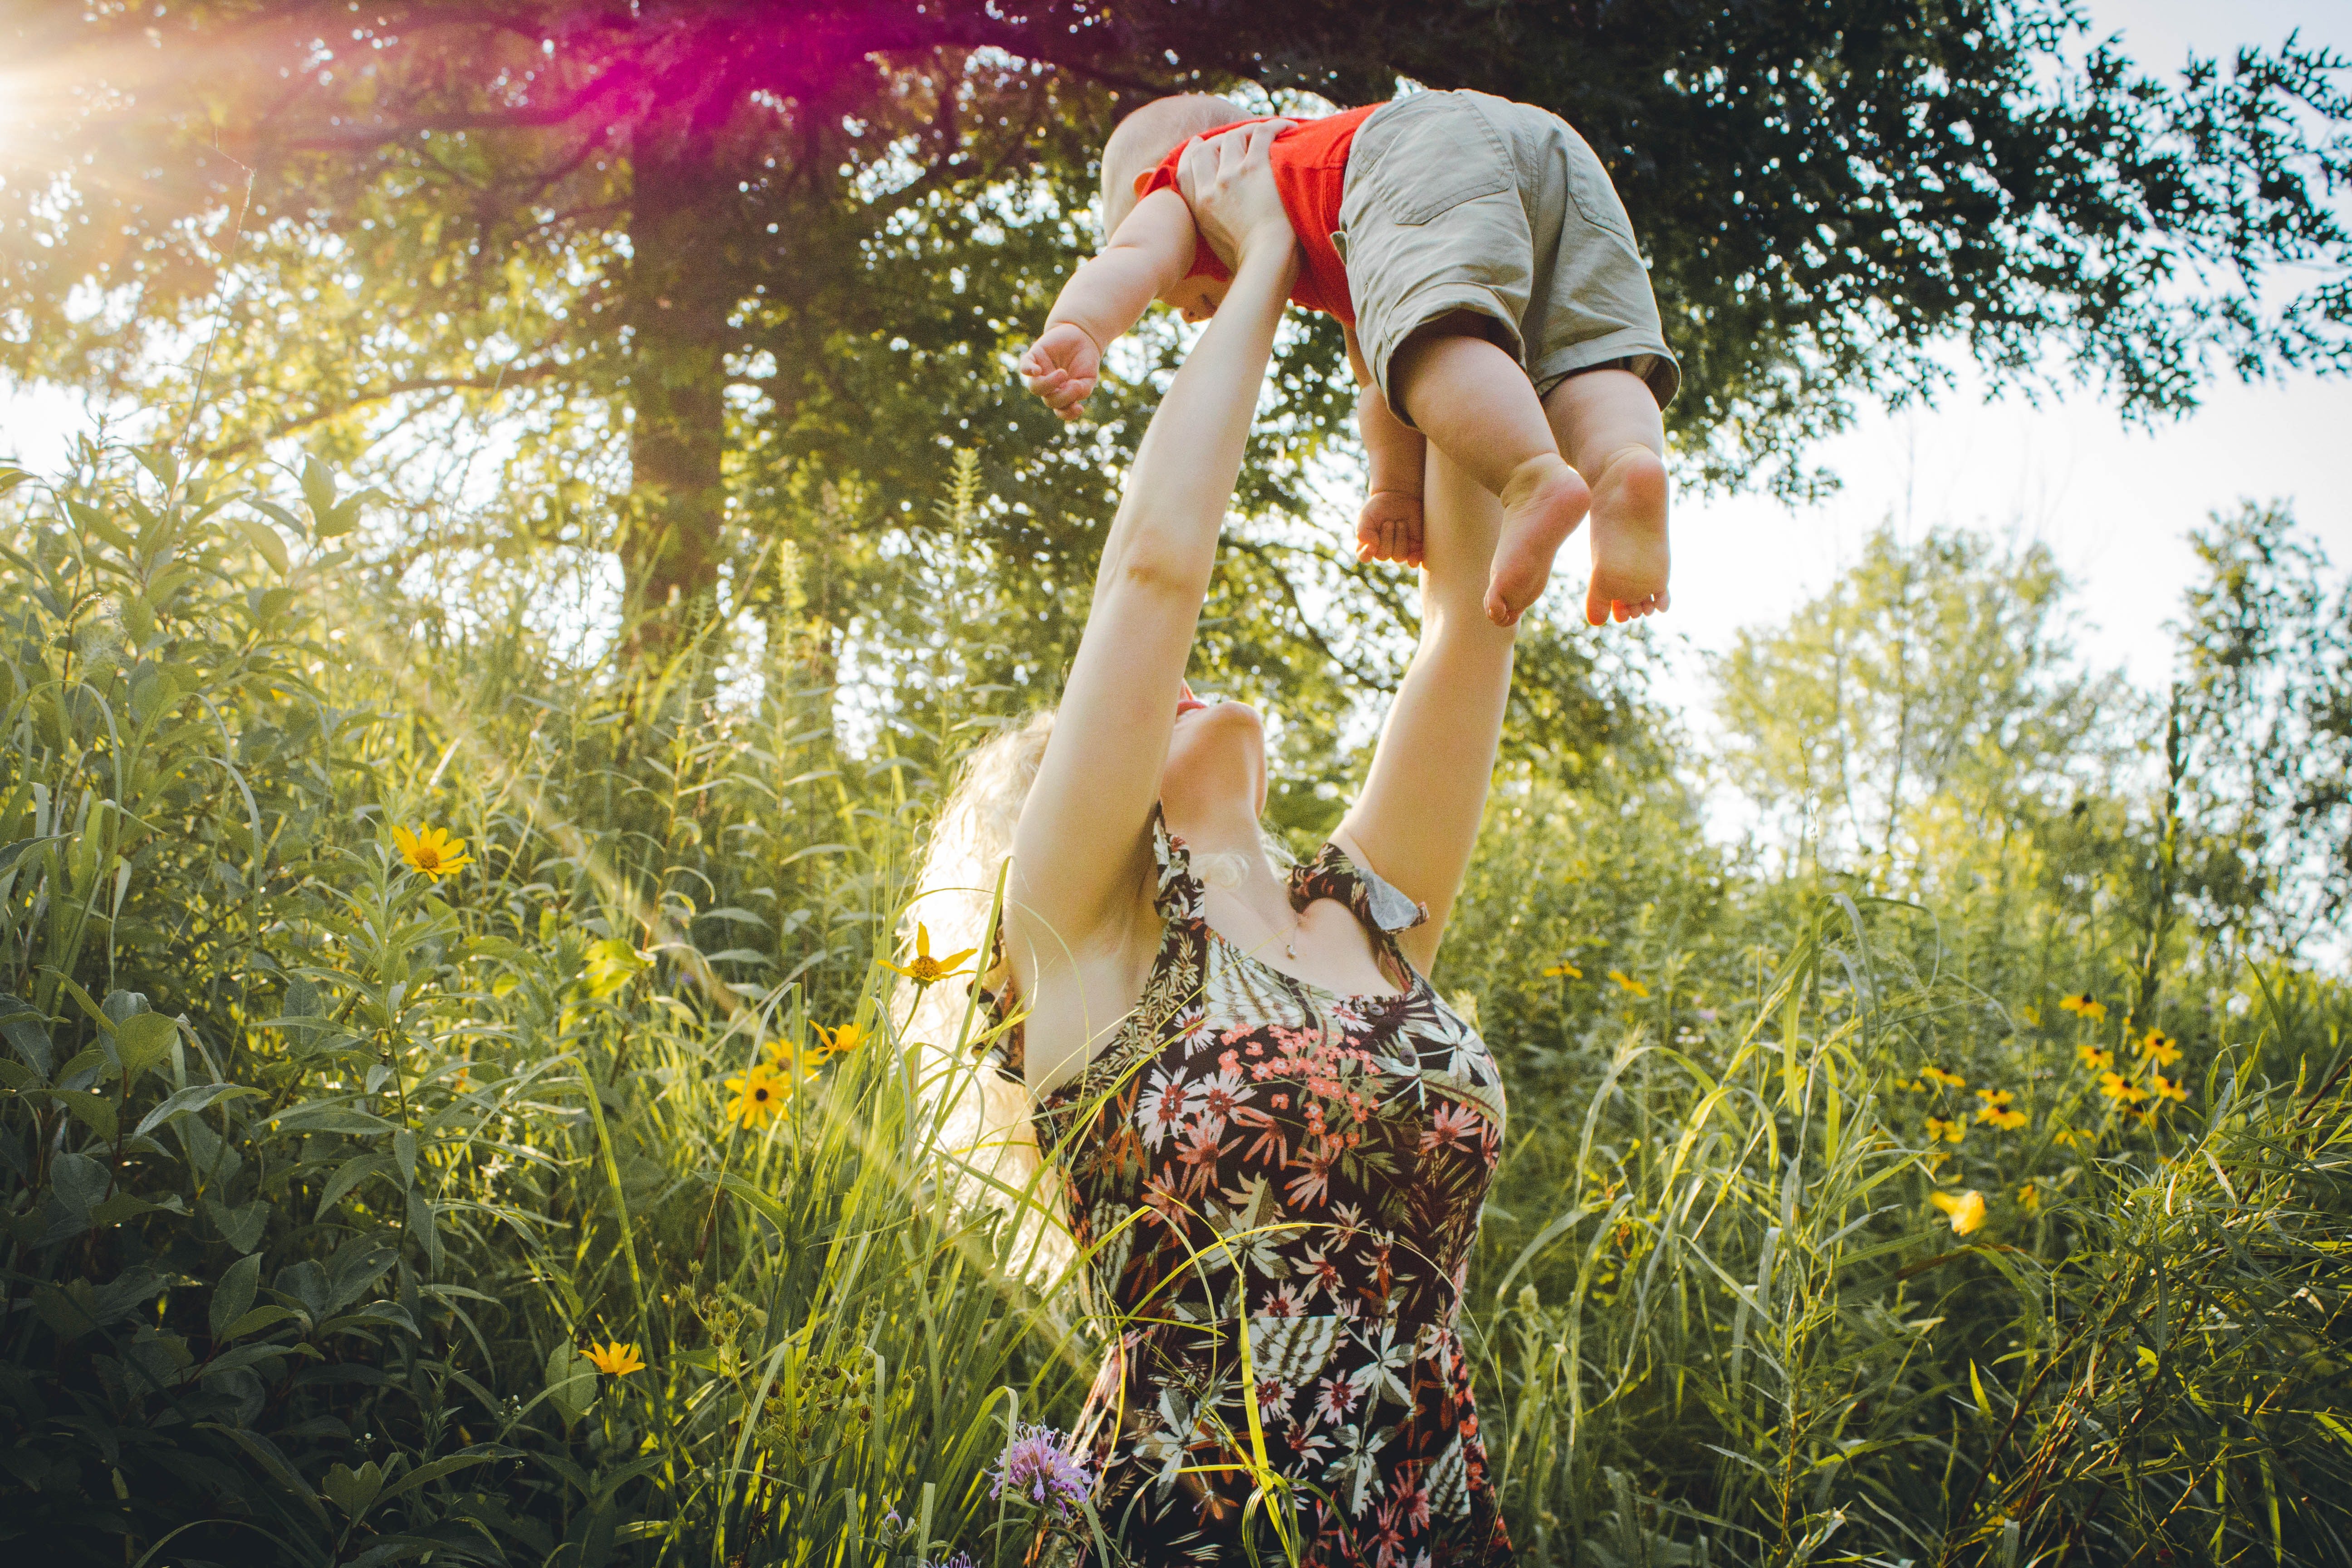 A mother lifting her baby. | Source: Pexels